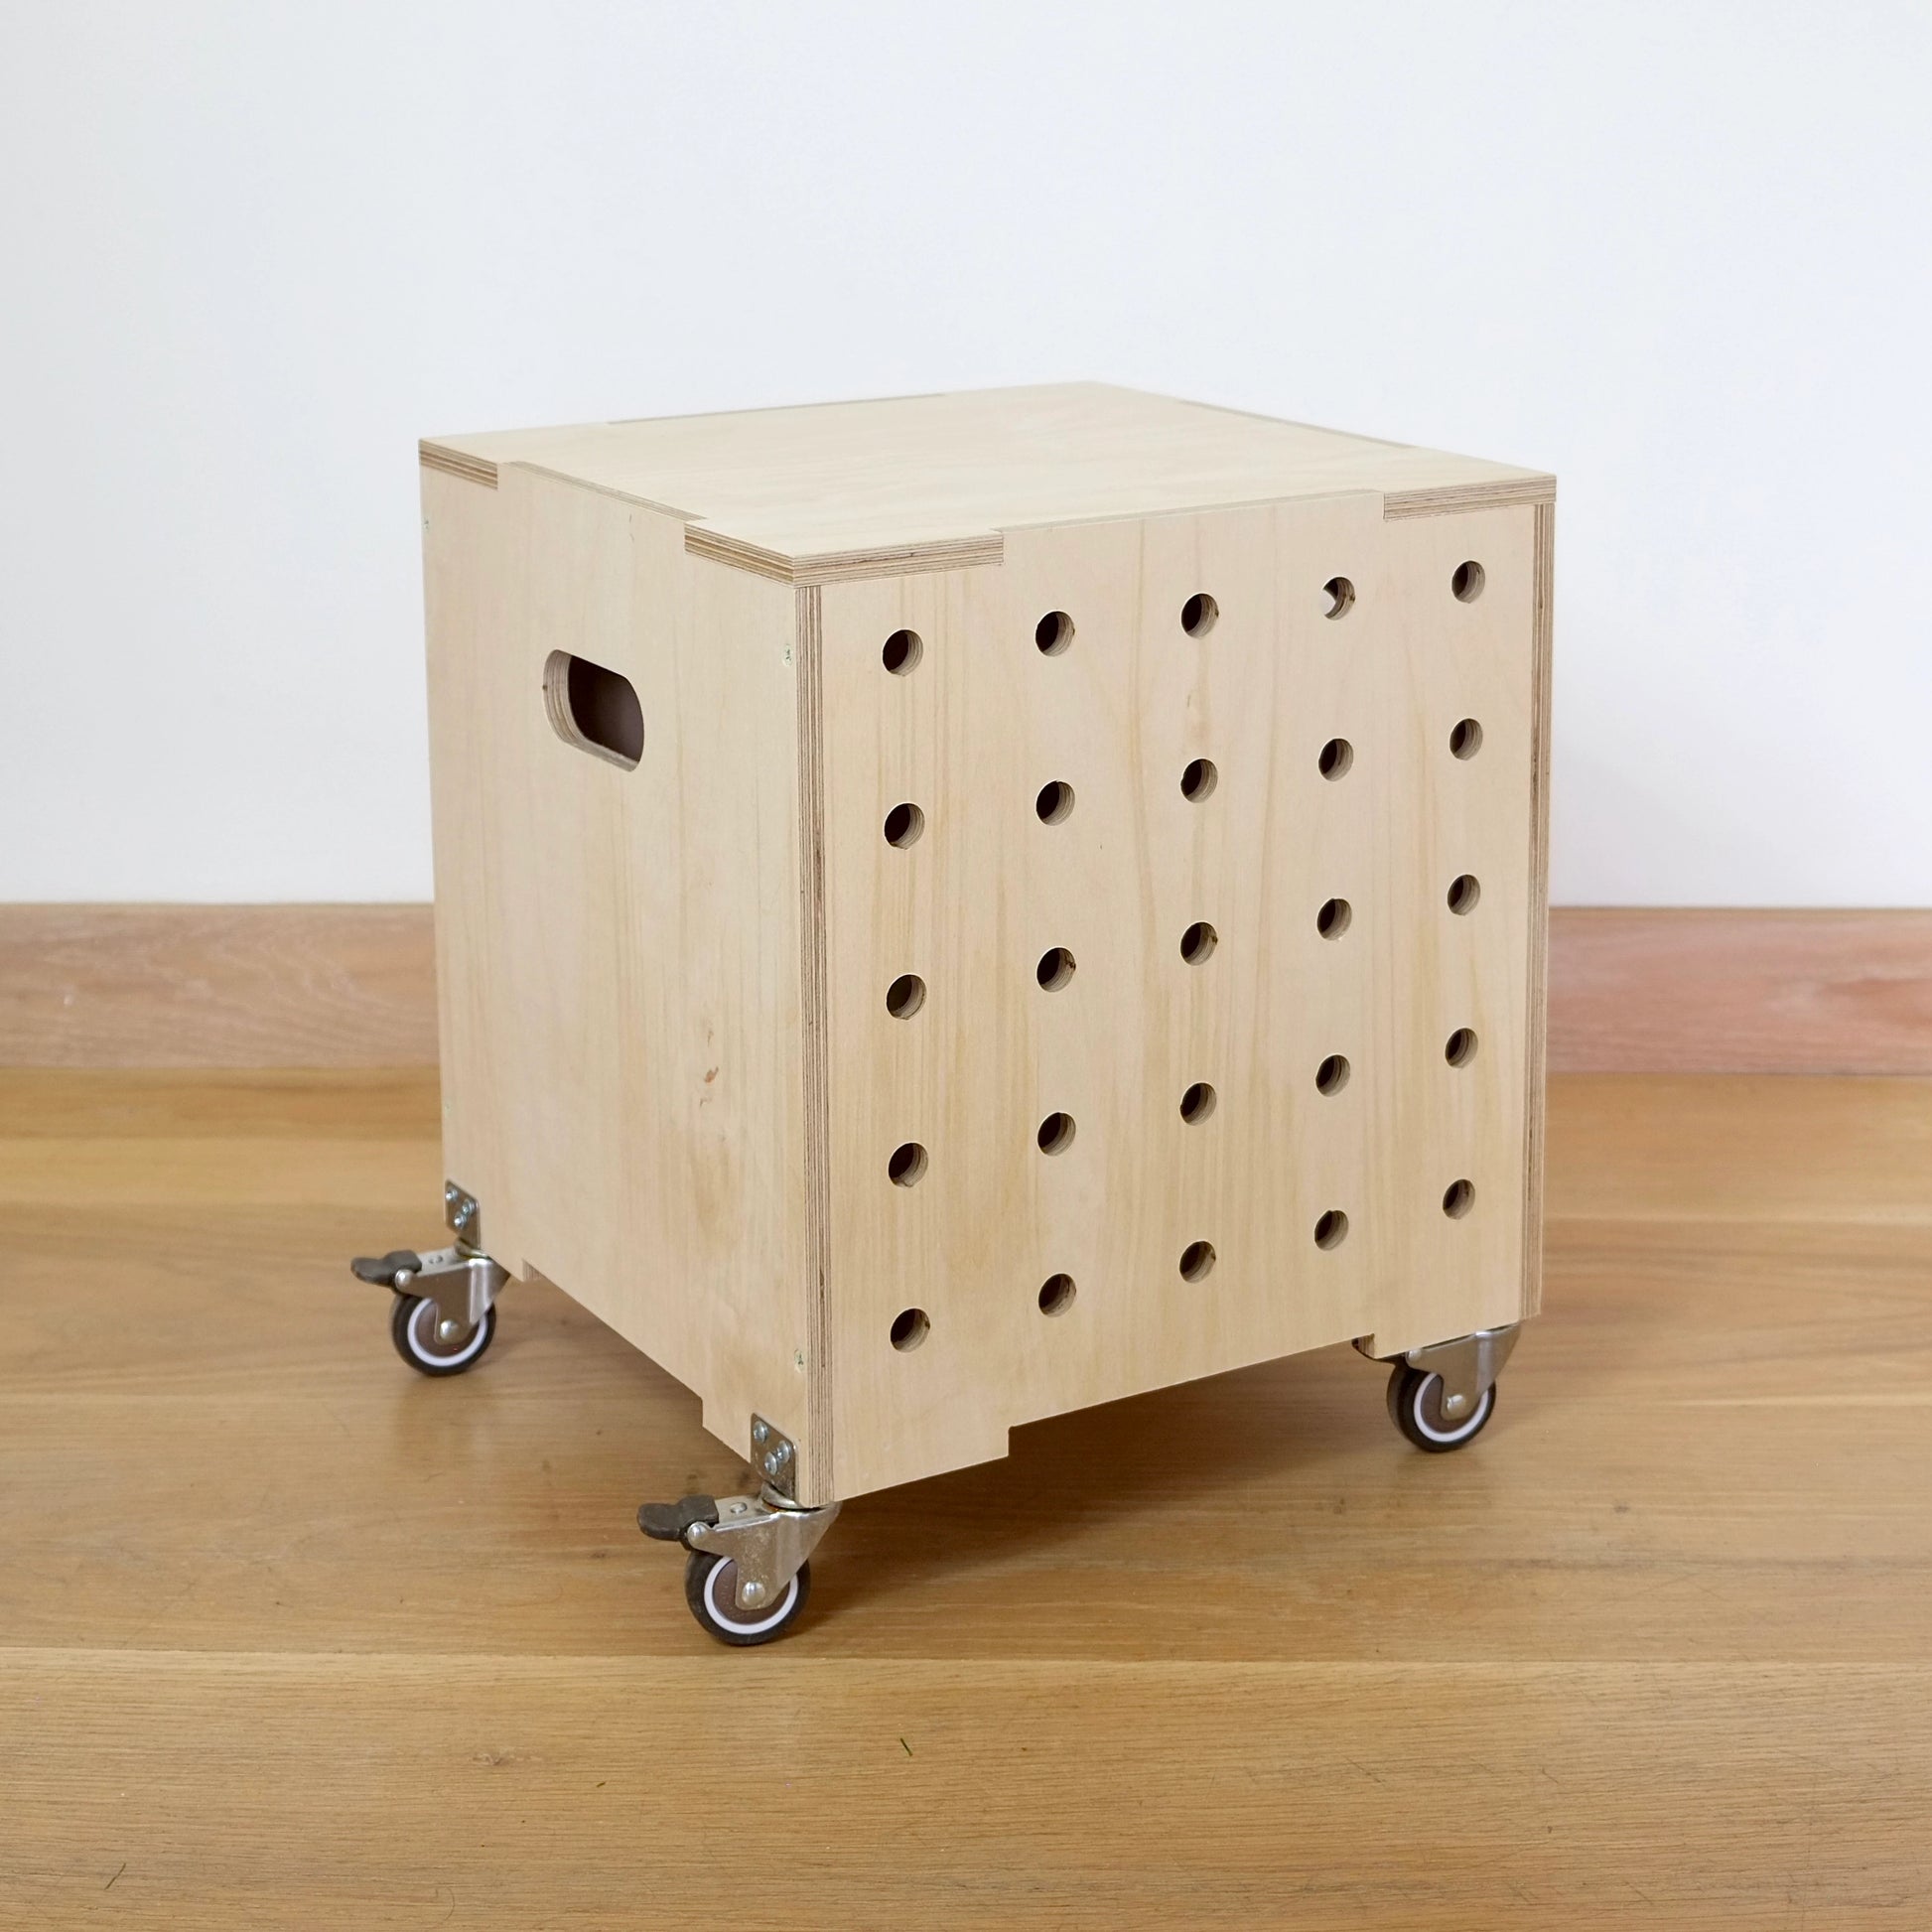 A simple birch plywood square shaped storage crate, faces diagonally to the right and sits on a wooden floor. There are five rows of holes cut in the front facet, it has castors and a lid.